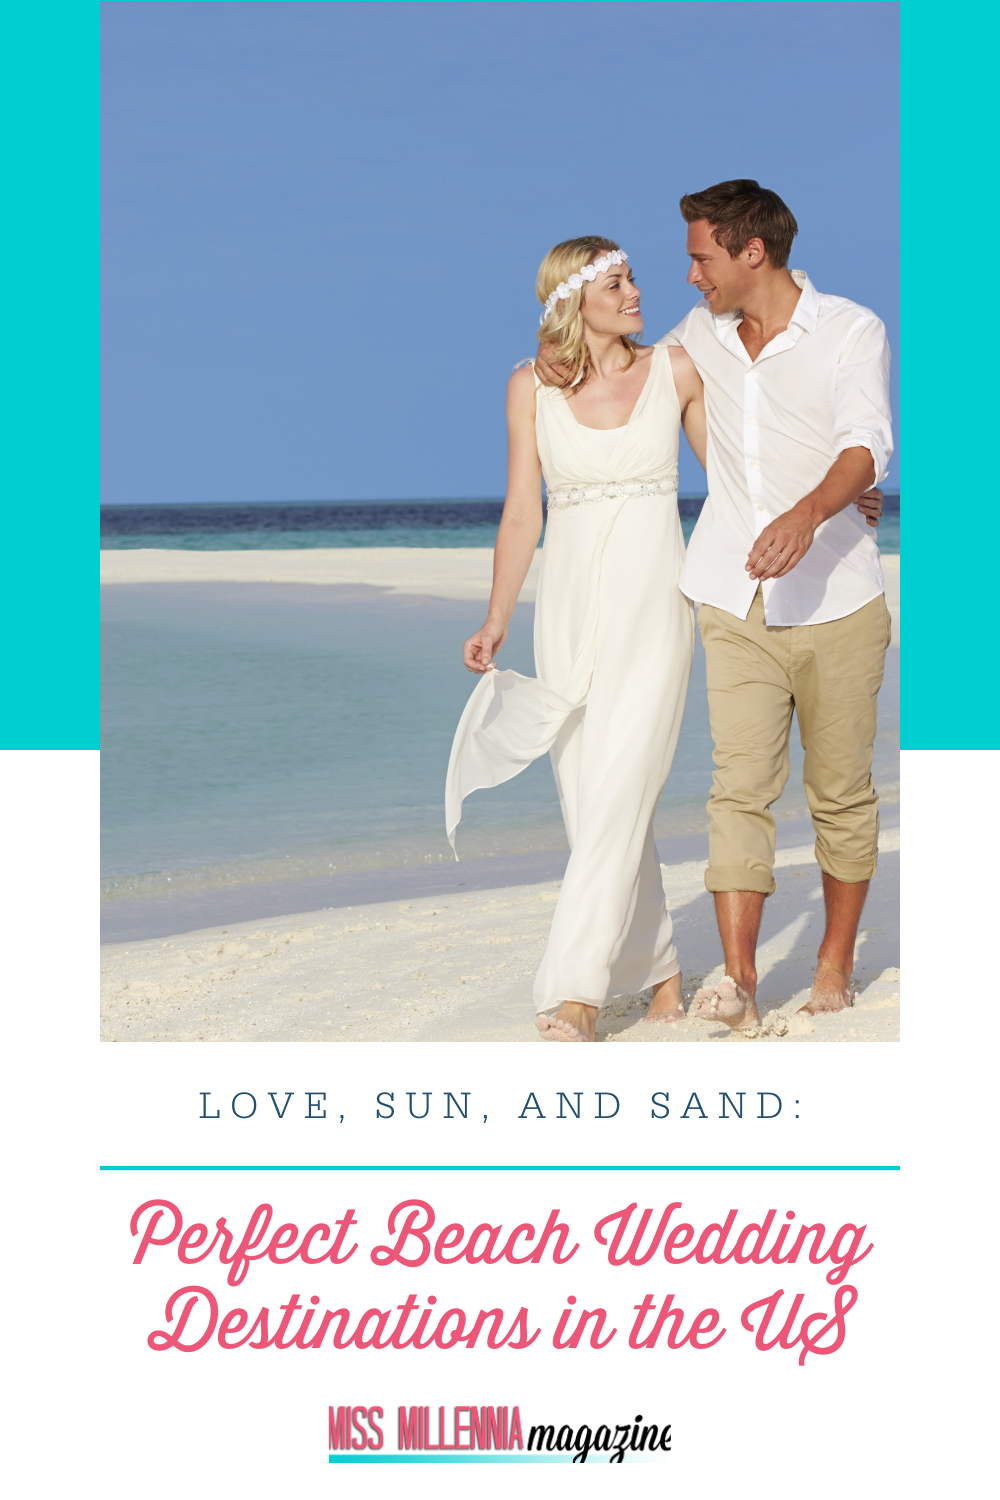 Love, Sun, and Sand: Perfect Beach Wedding Destinations in the US